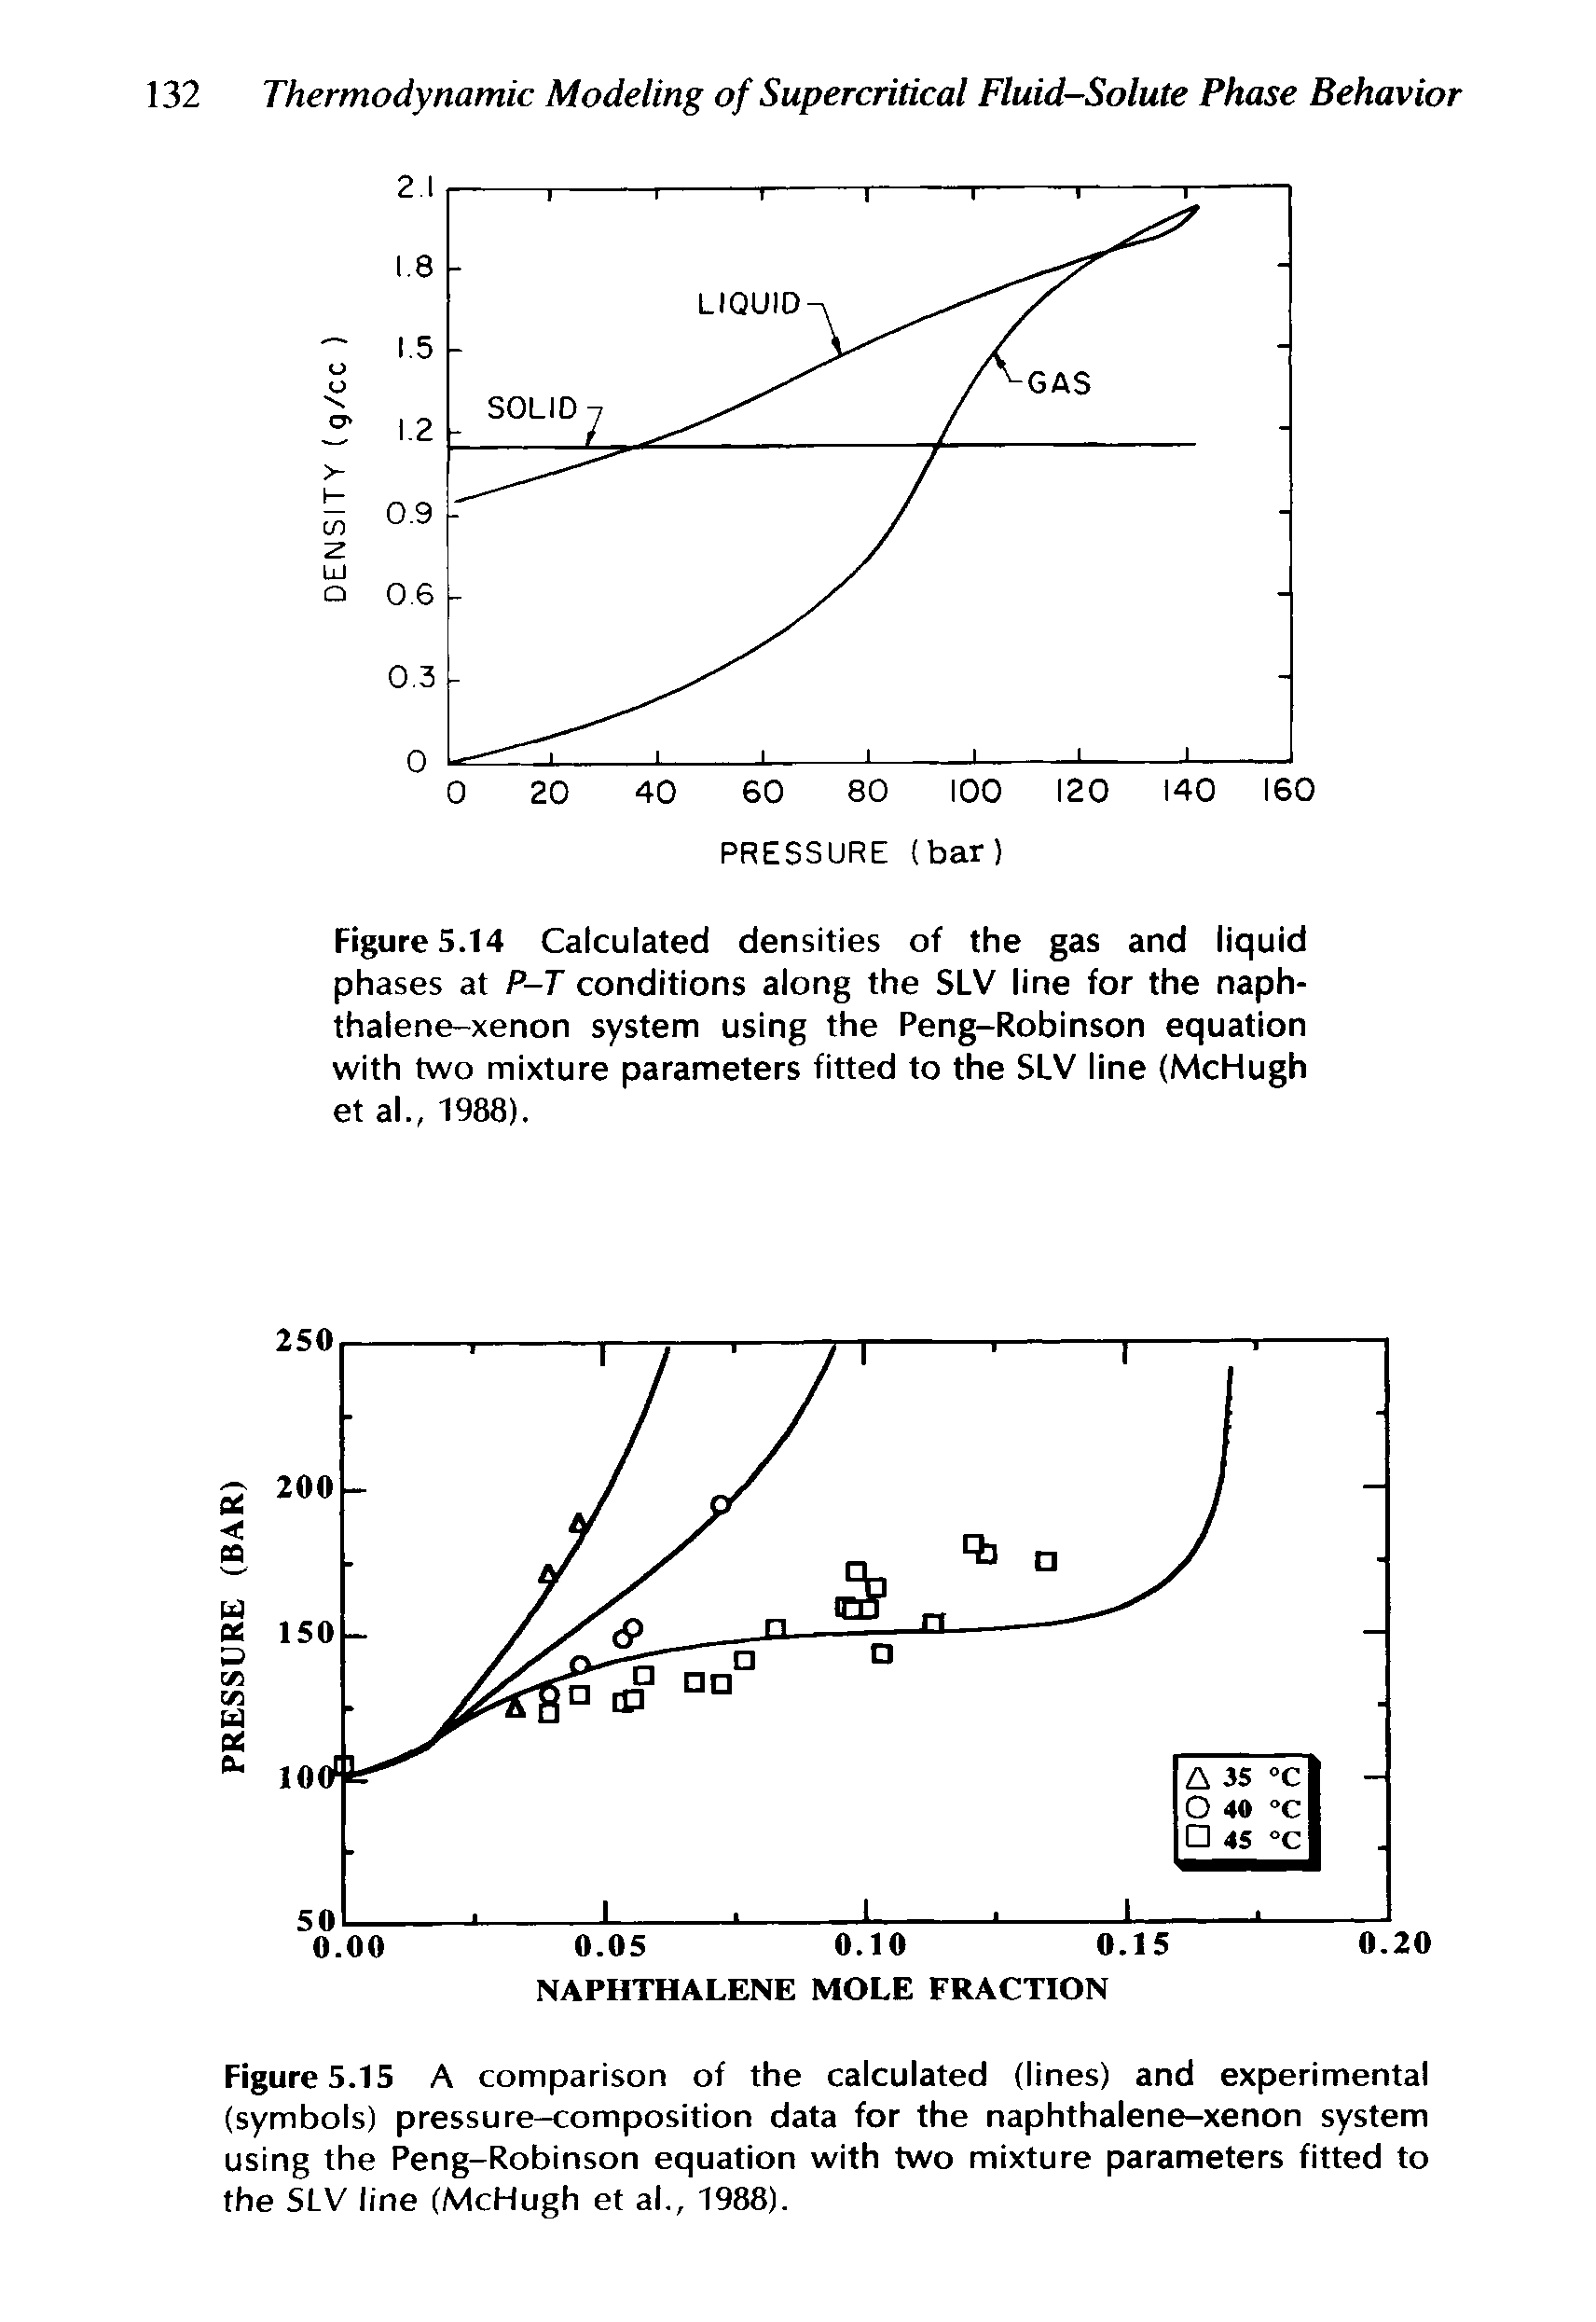 Figure 5.15 A comparison of the calculated (lines) and experimental (symbols) pressure-composition data for the naphthalene-xenon system using the Peng-Robinson equation with two mixture parameters fitted to the SLV line (McHugh et al., 1988).